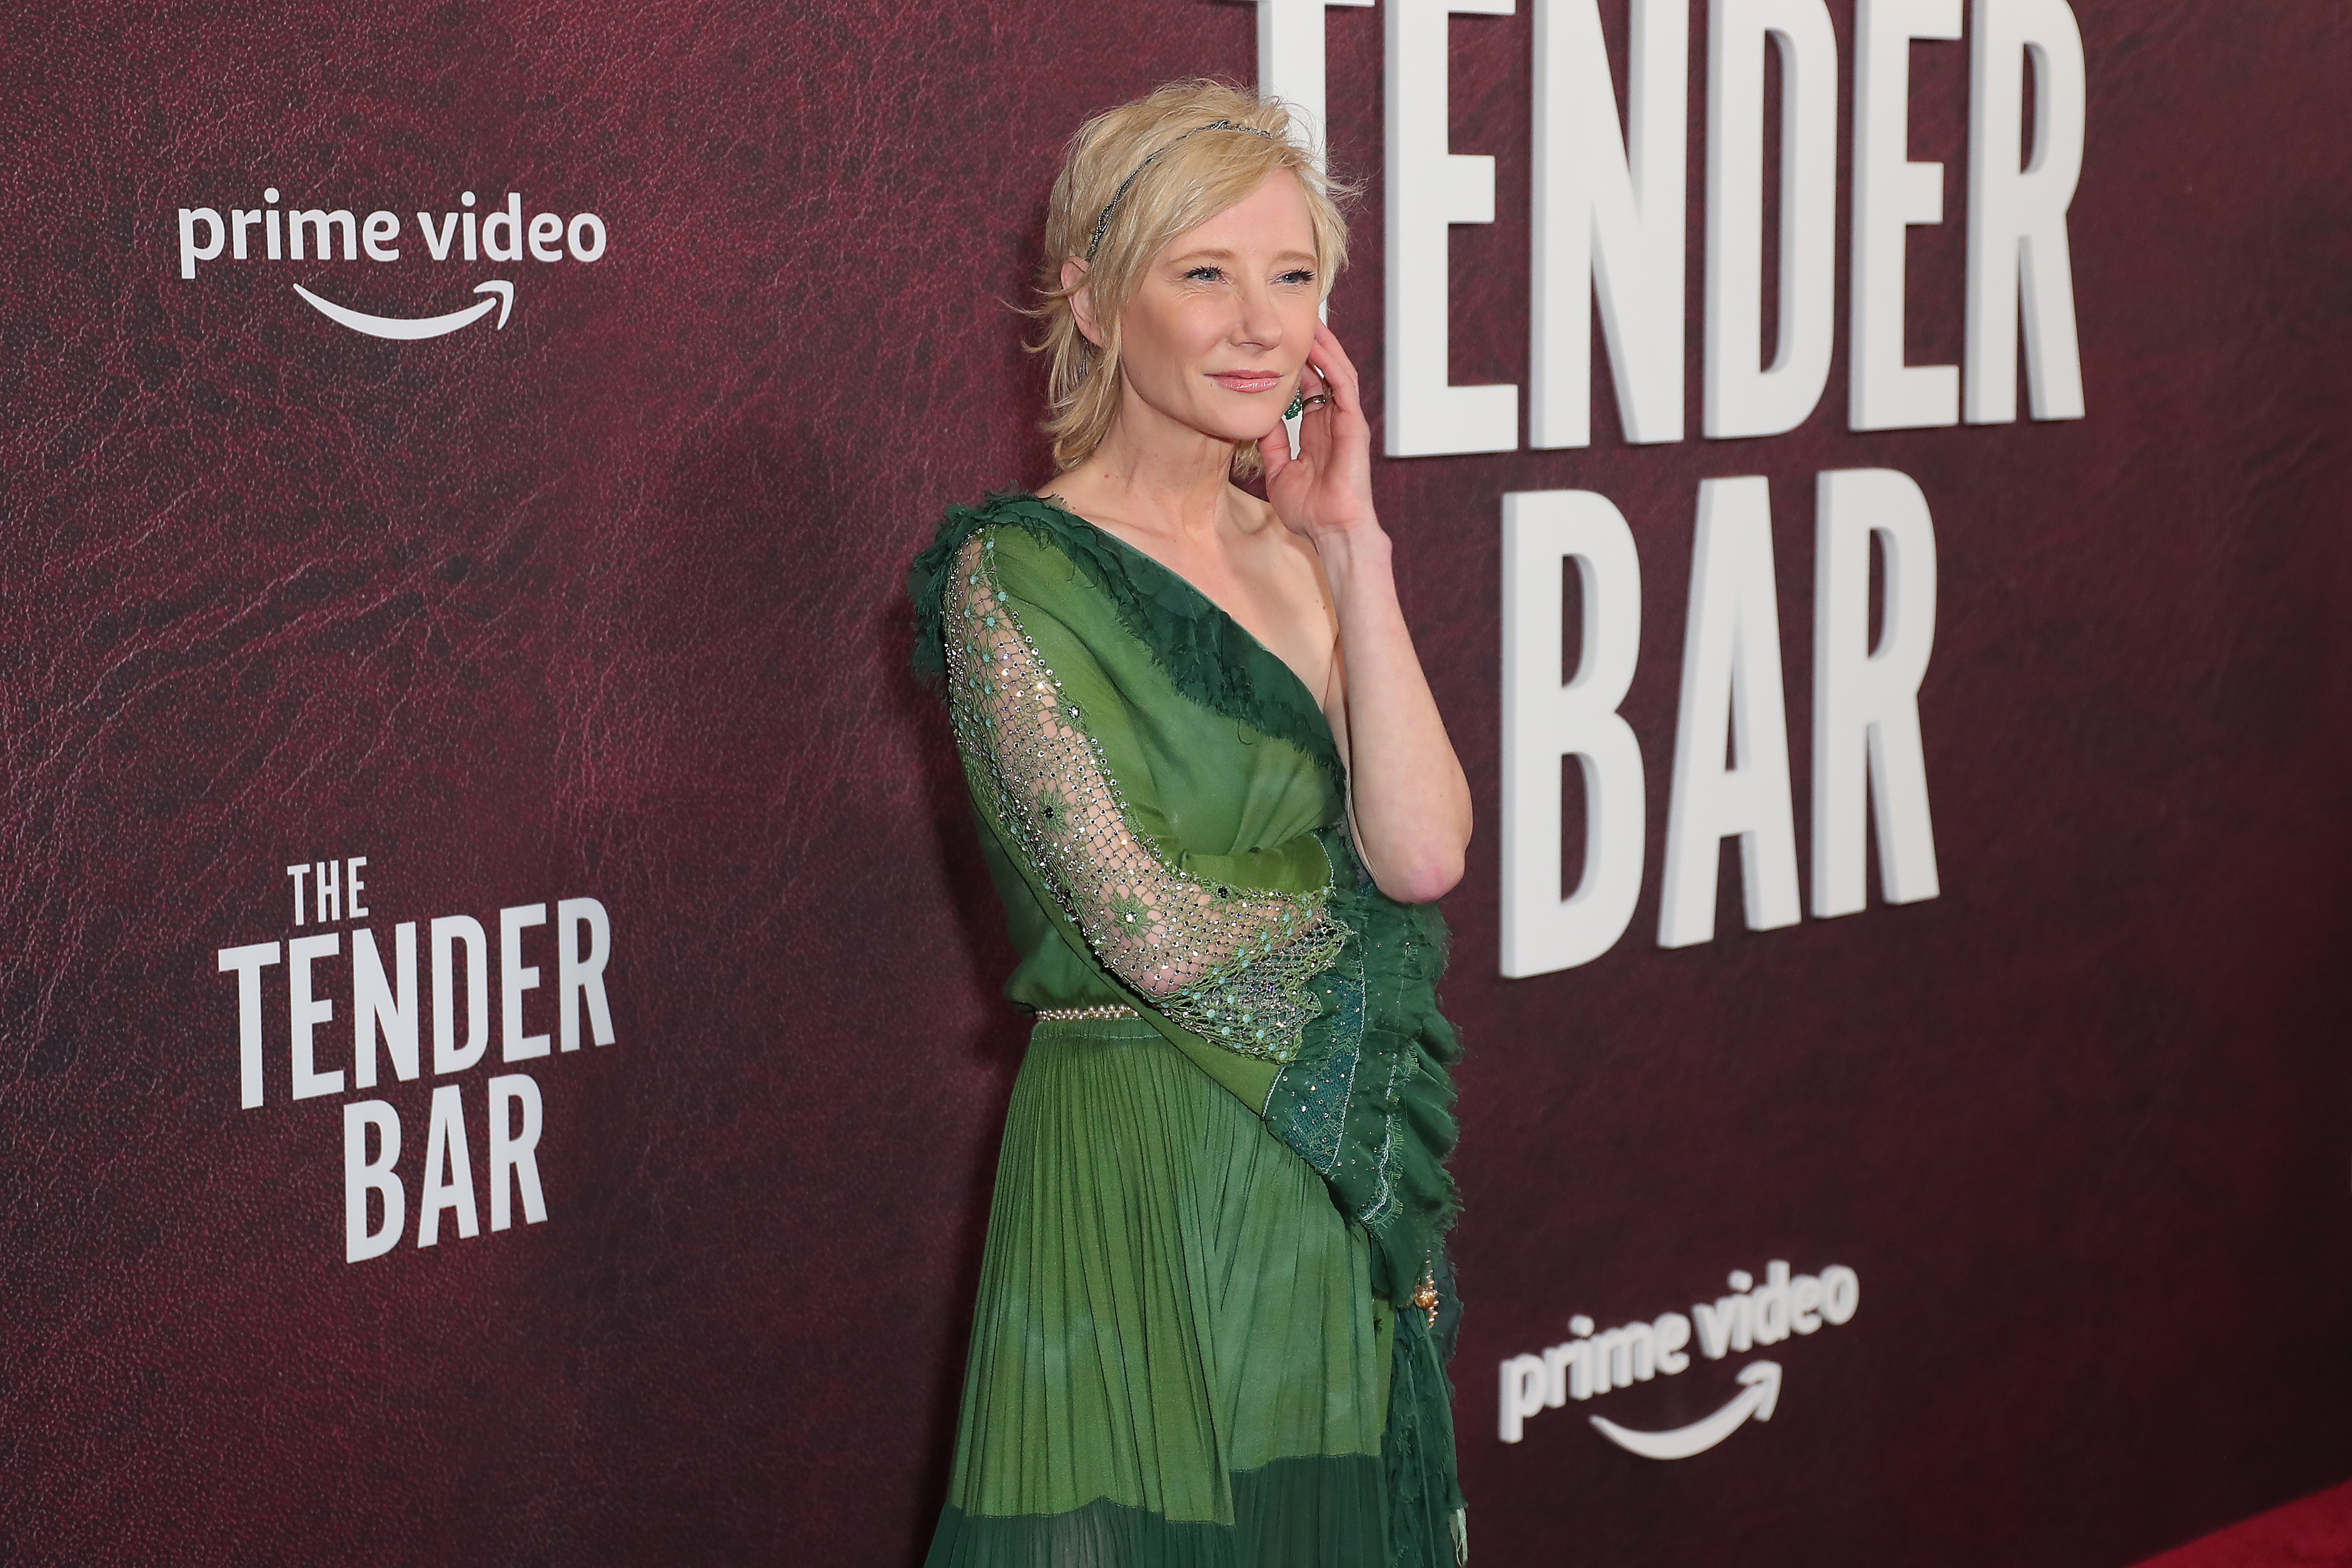 Anne Heche at the Los Angeles Premiere of "The Tender Bar" at TCL Chinese Theatre on December 12, 2021, in Hollywood, California. | Source: Getty Images